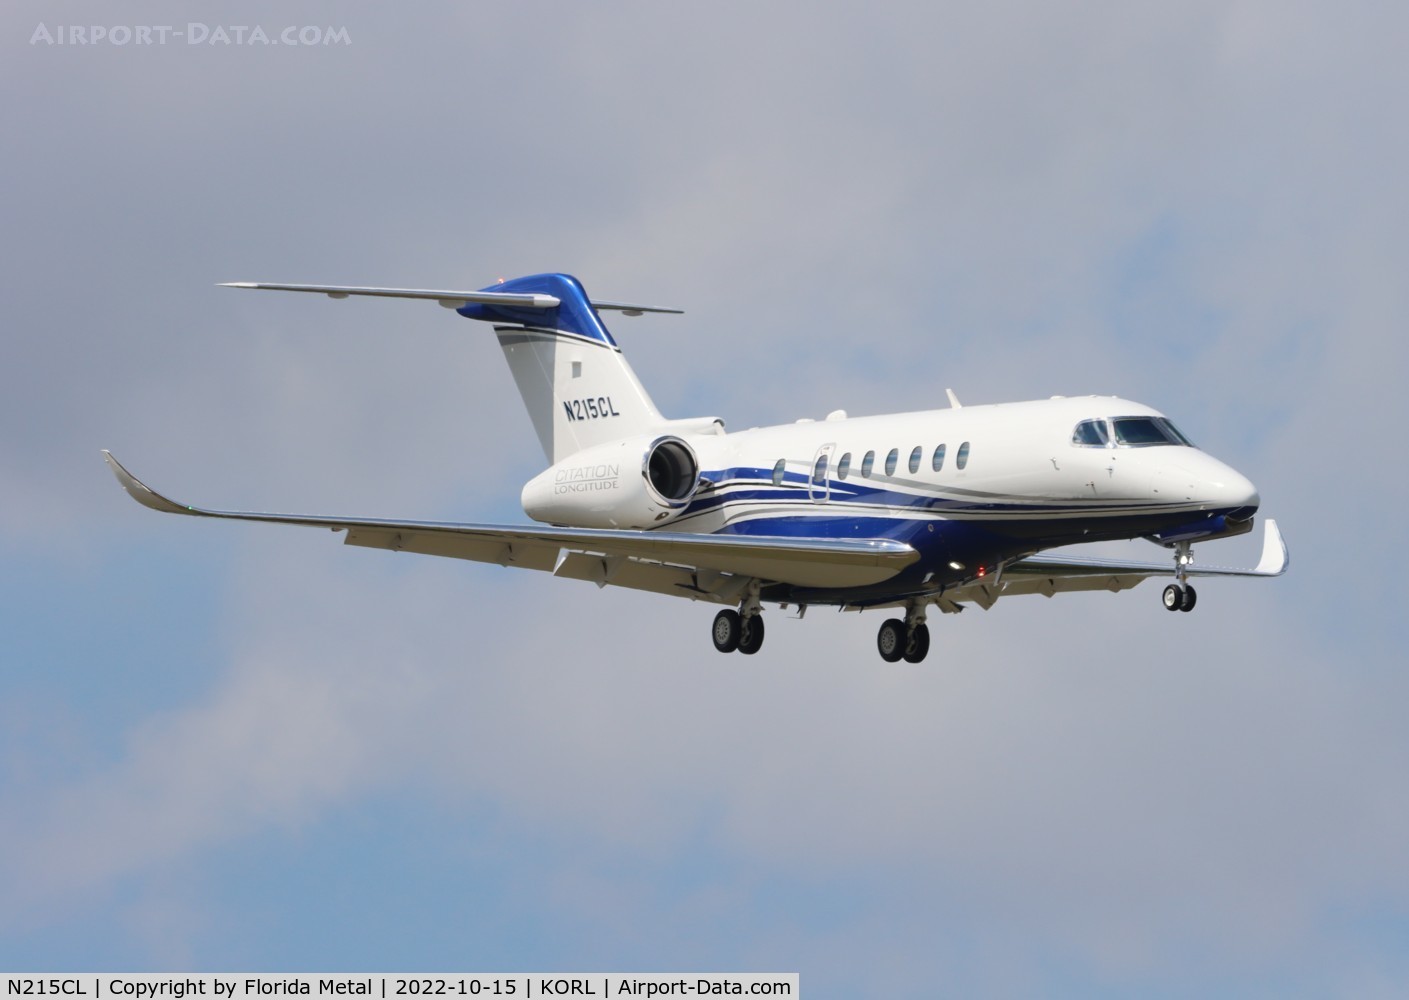 N215CL, 2019 Cessna 700 Citation Longitude C/N 700-0015, This aircraft was N763JA last time I saw it in June 2022